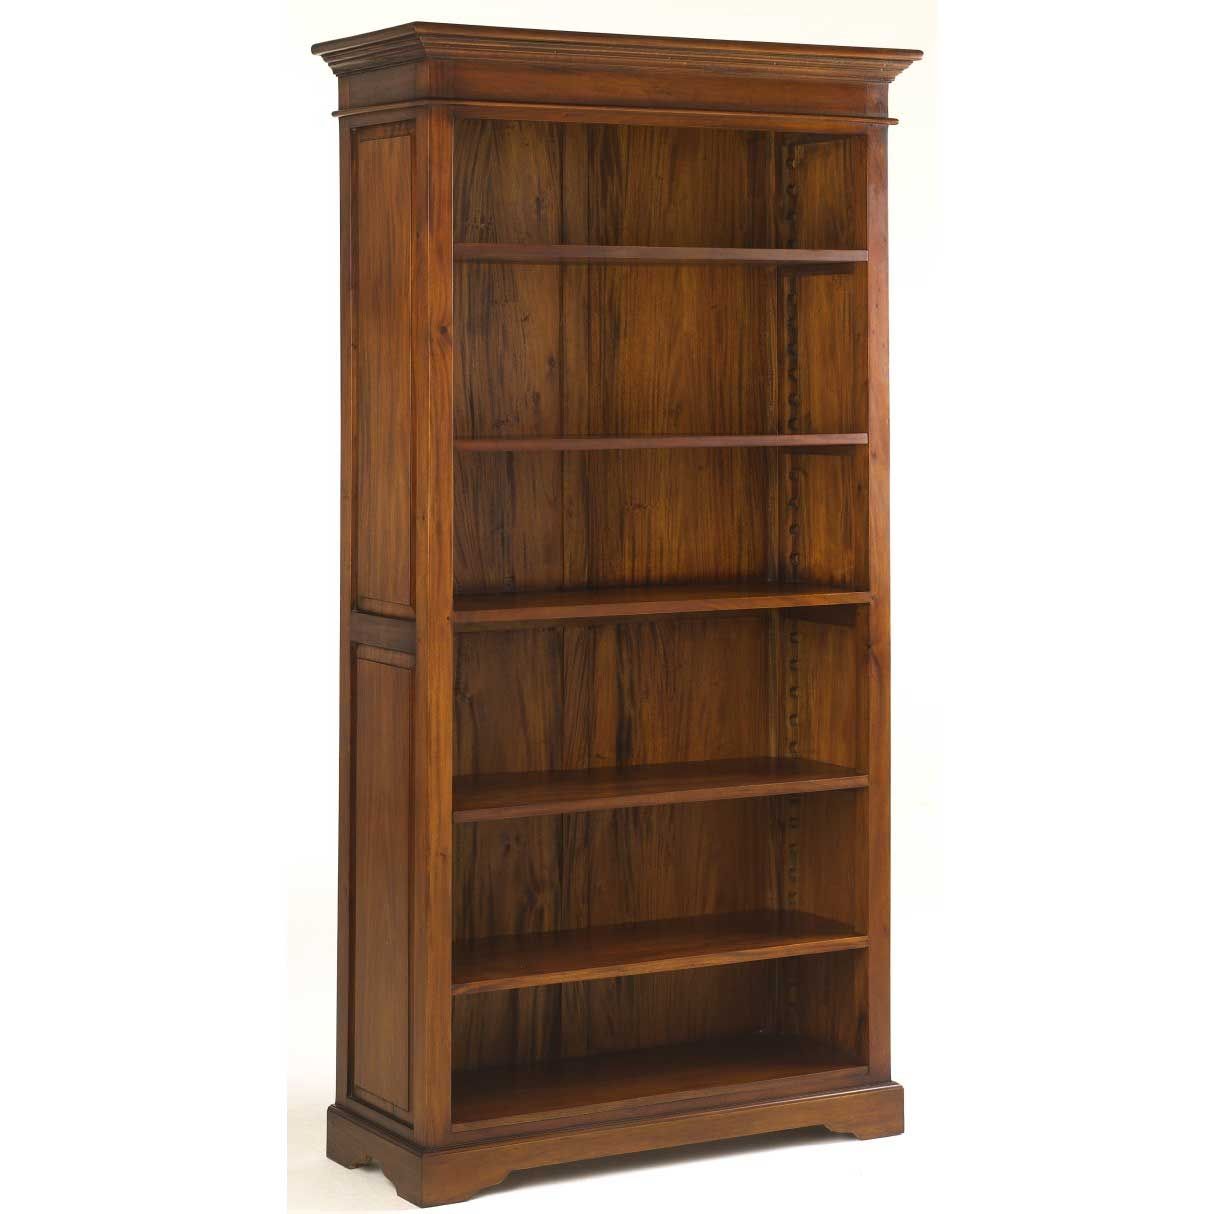 Solid Oak Bookcases In Seven Sizes Roselawnlutheran With Solid Oak Shelves (View 13 of 15)